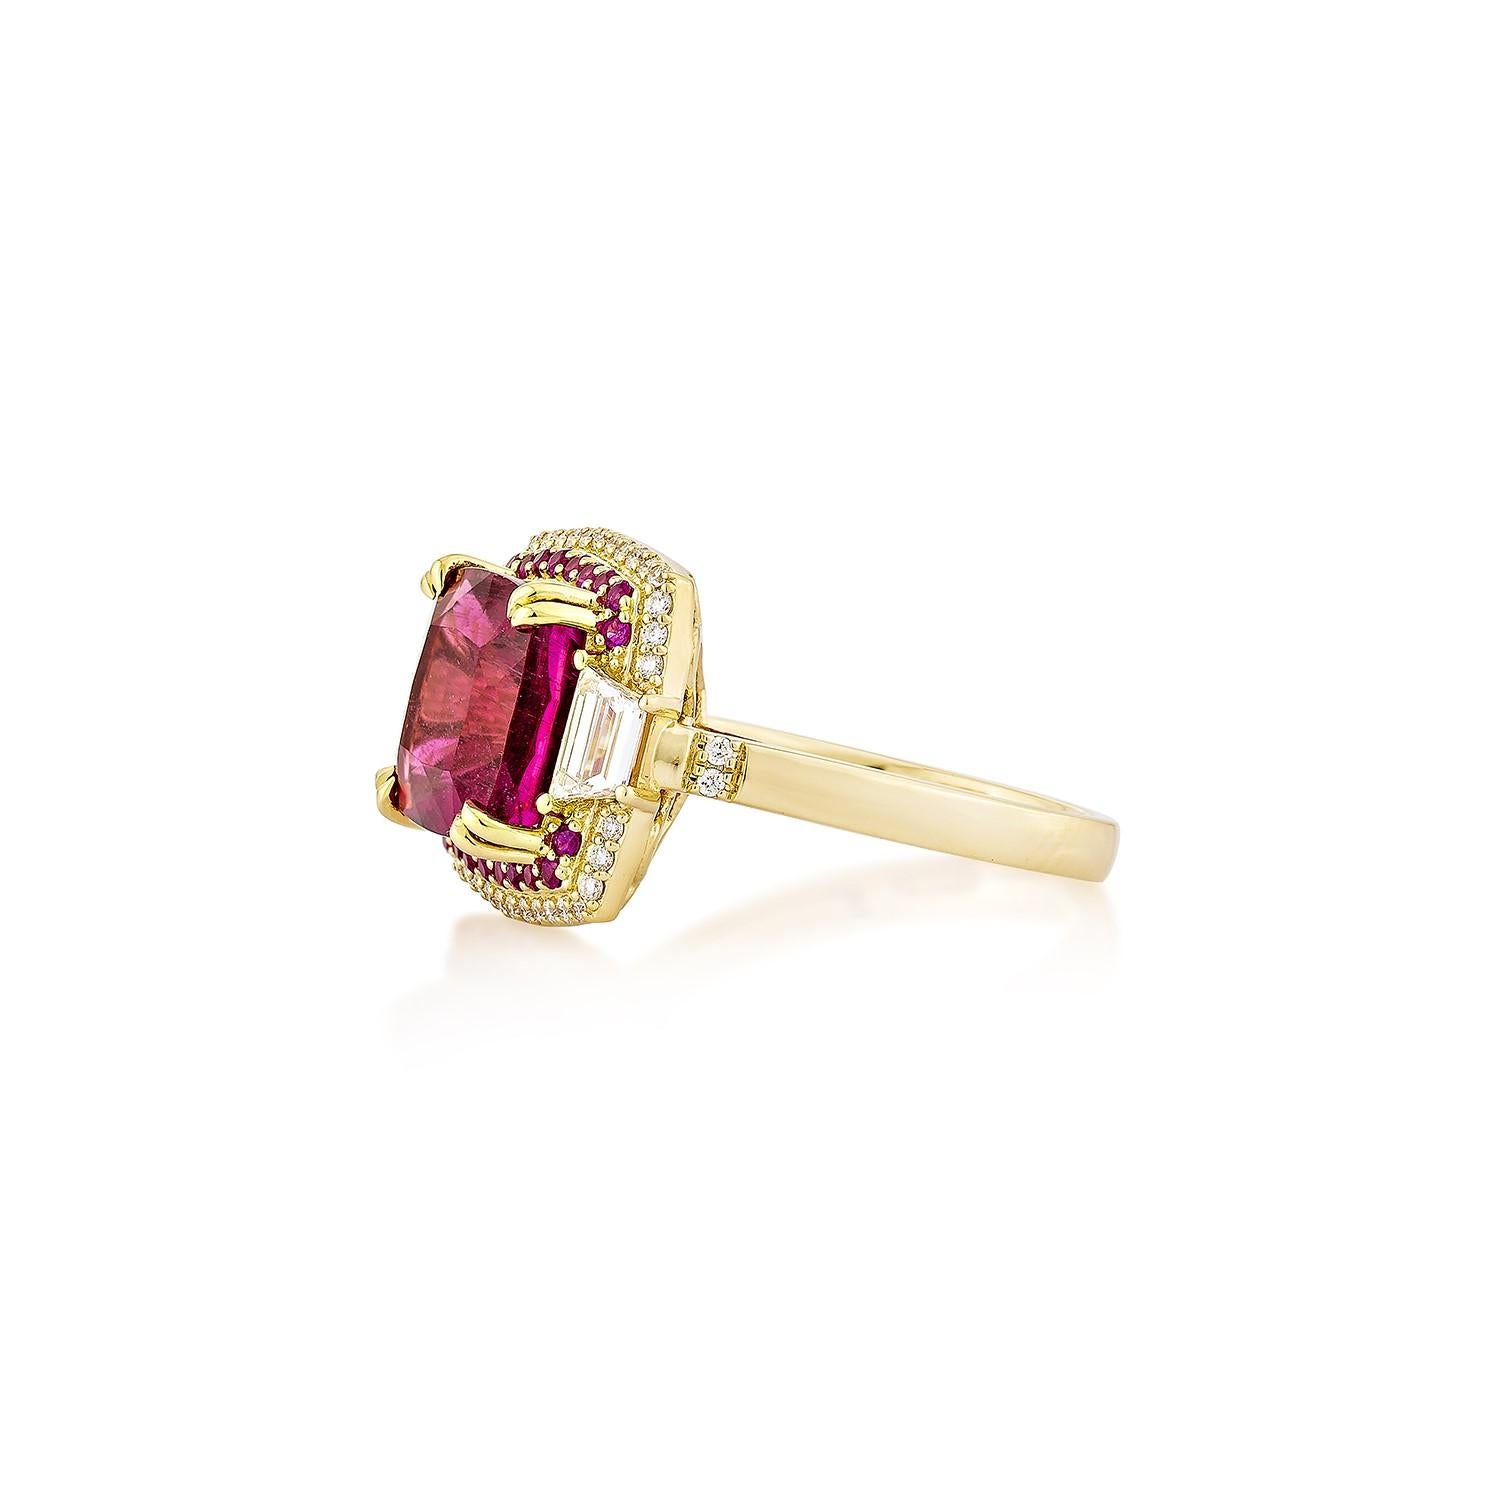 Cushion Cut 5.73 Carat Rubellite Cocktail Ring in 18Karat Yellow Gold with Ruby and Diamond. For Sale